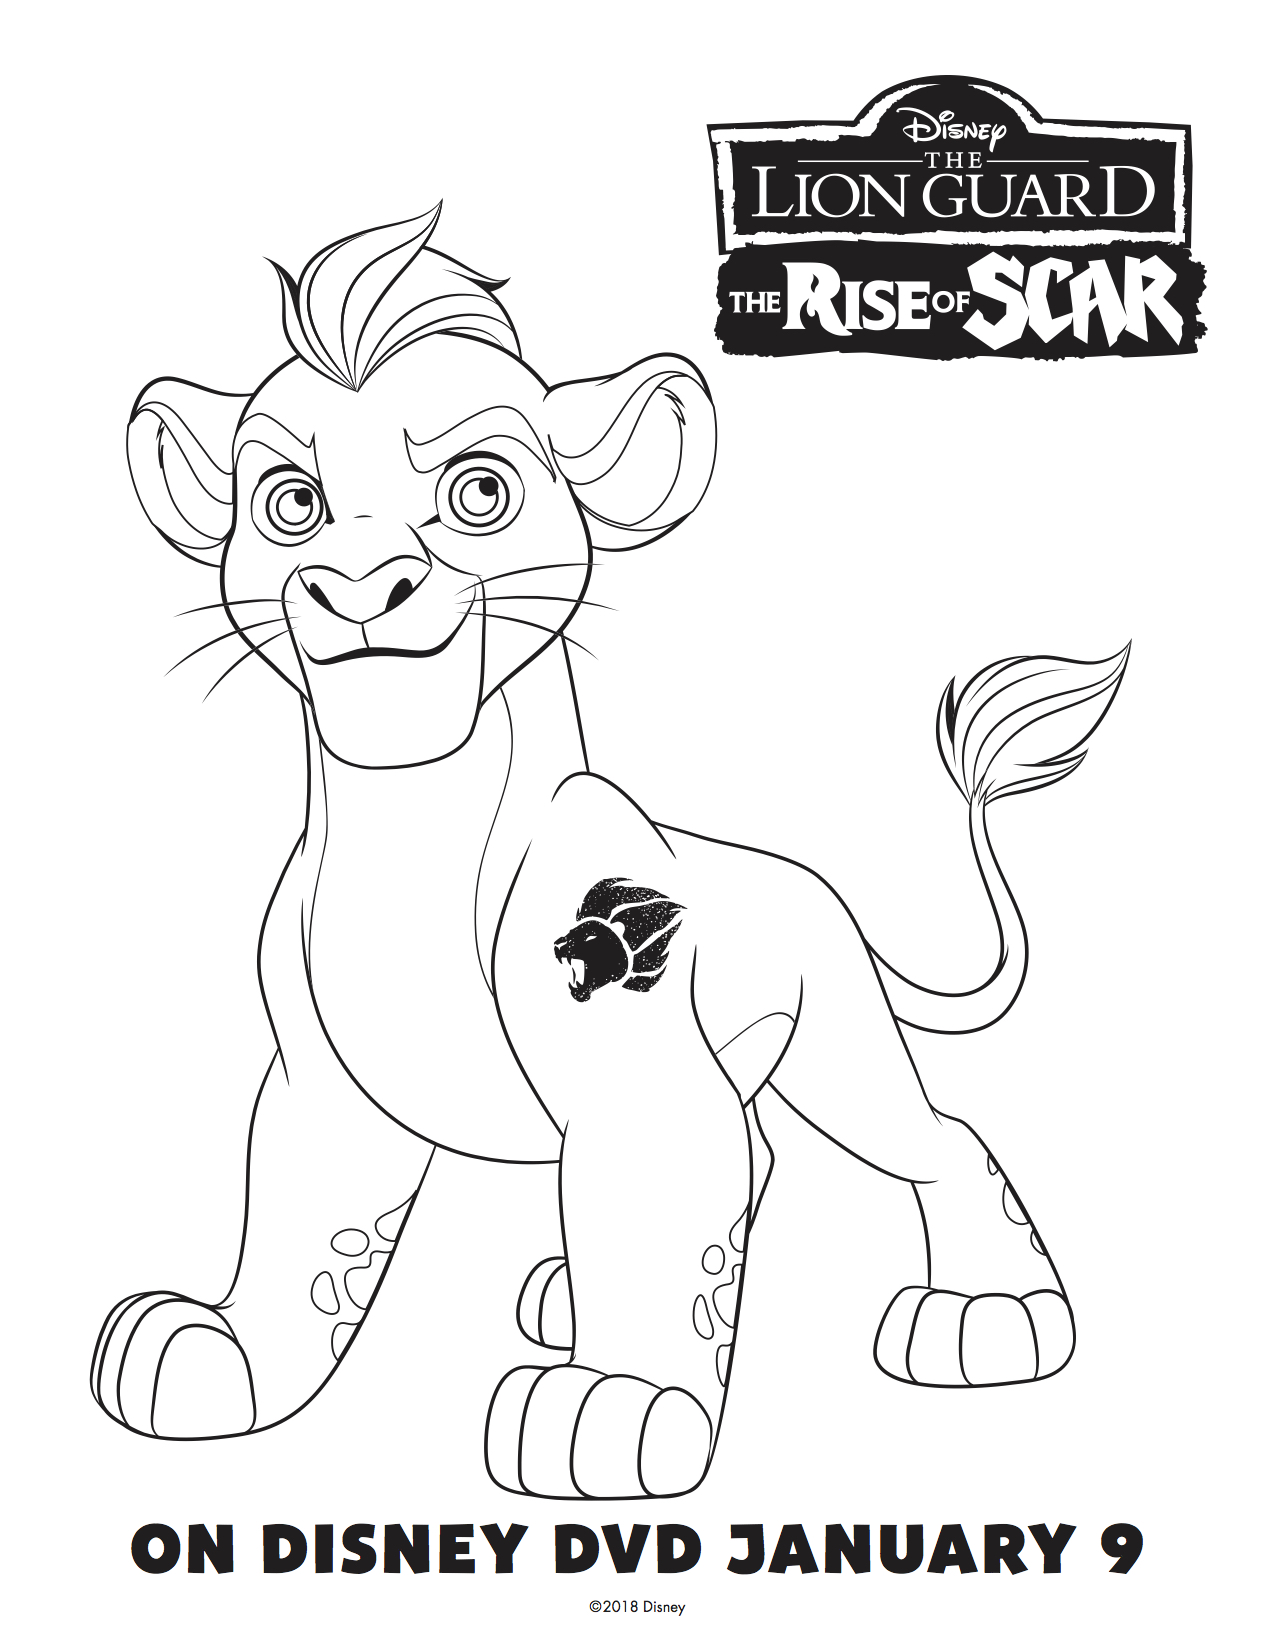 Check out these free The Lion Guard The Rise of Scar coloring sheets and activities sheets on the links to 